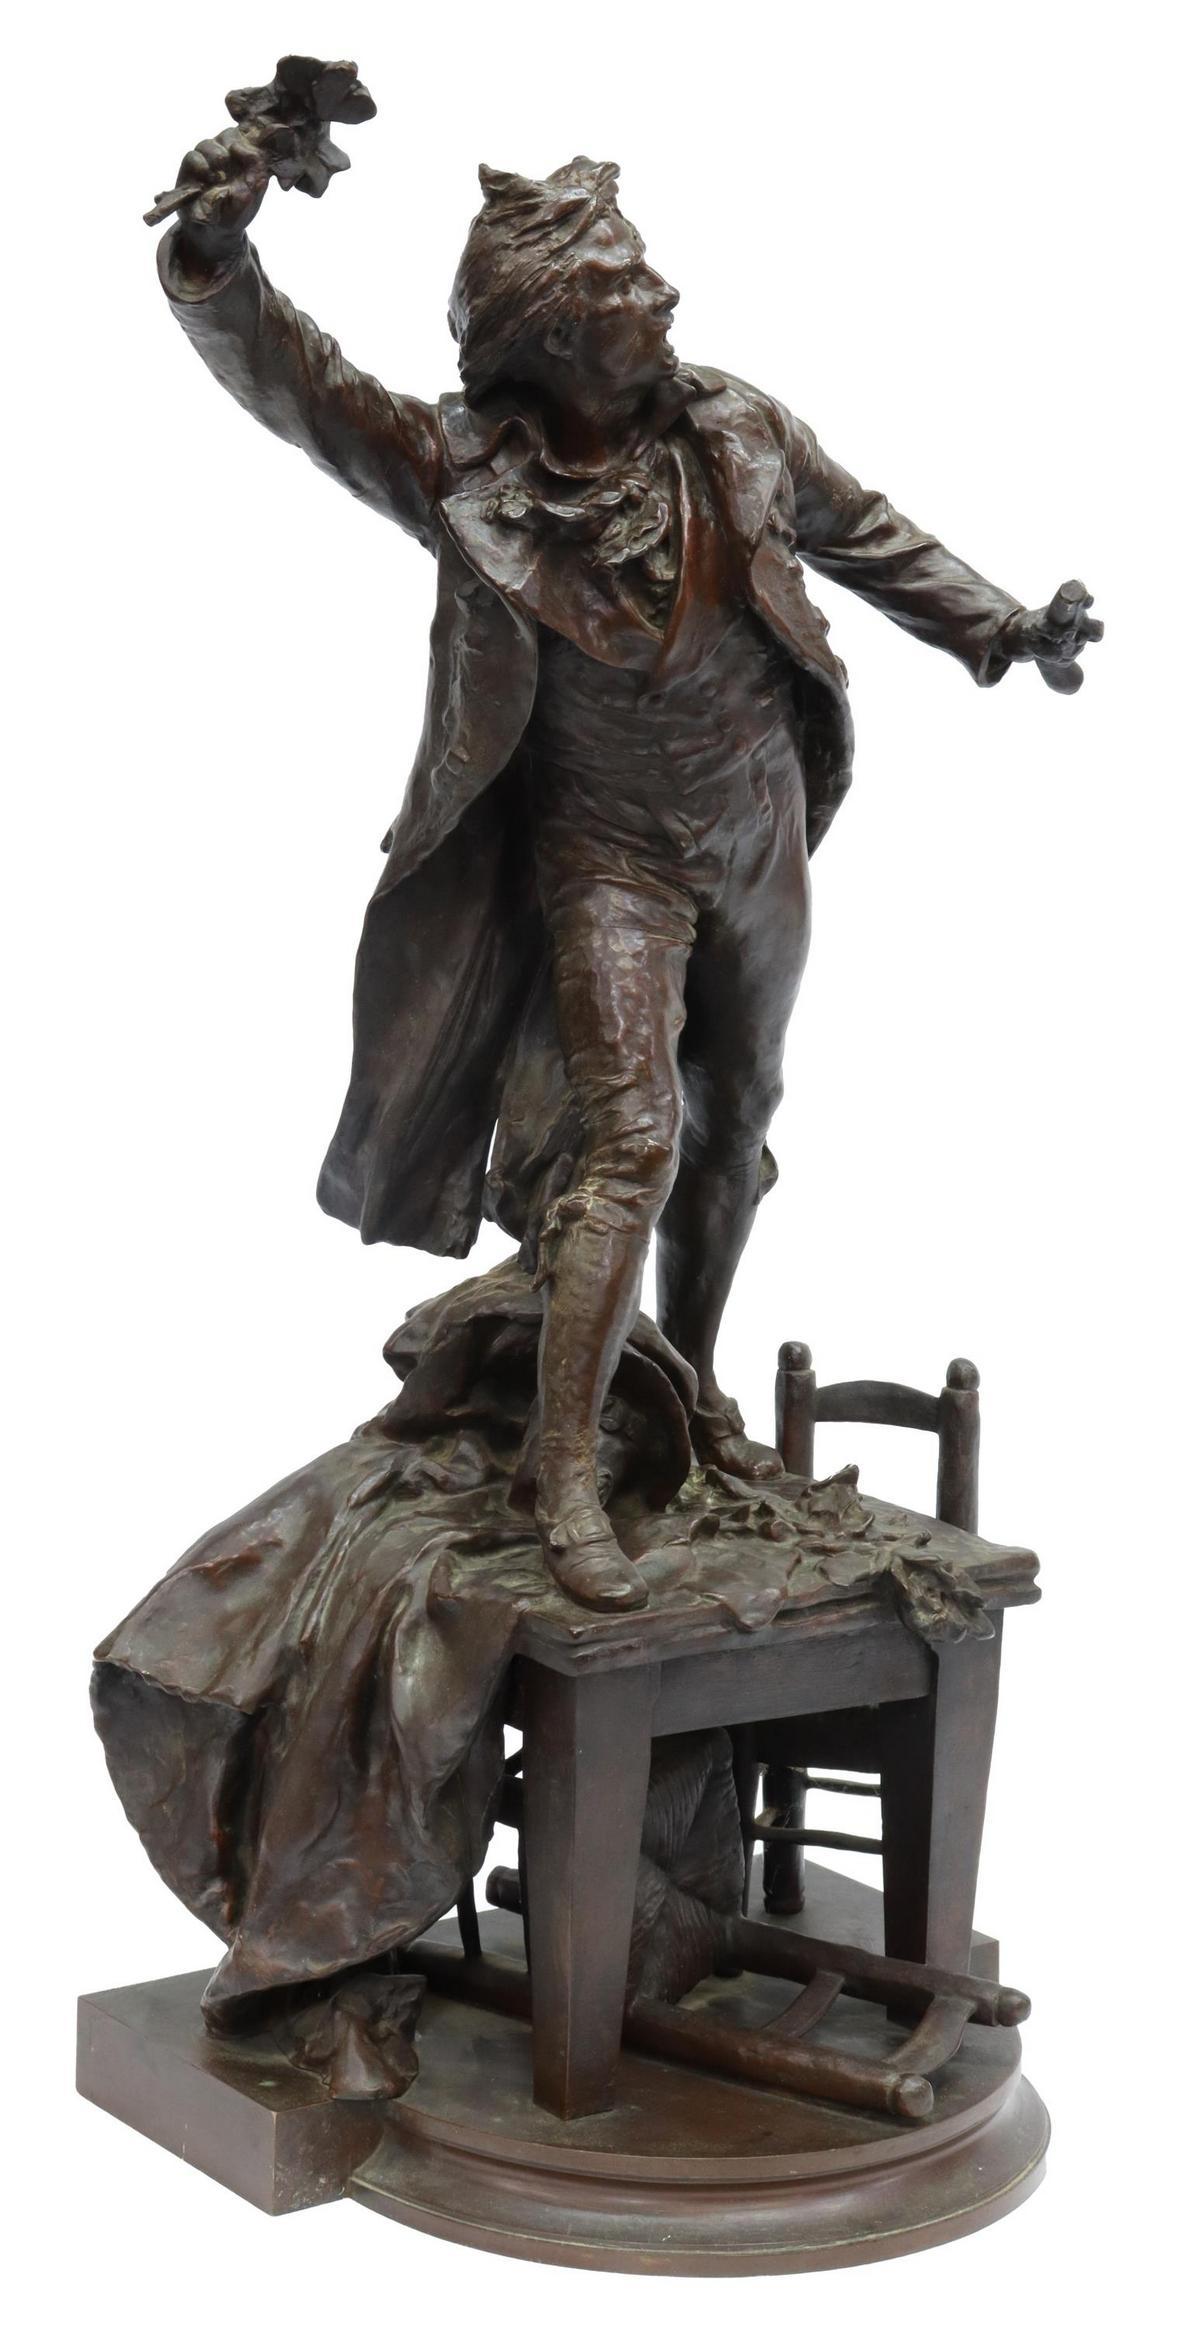 A reminder to start a revolution every day!

Inspired by the French Revolution, this patinated bronze sculpture depicts the legendary revolutionary Camille Desmoulins giving an impassioned speech at Cafe du Foy. A timeless tribute to the man who